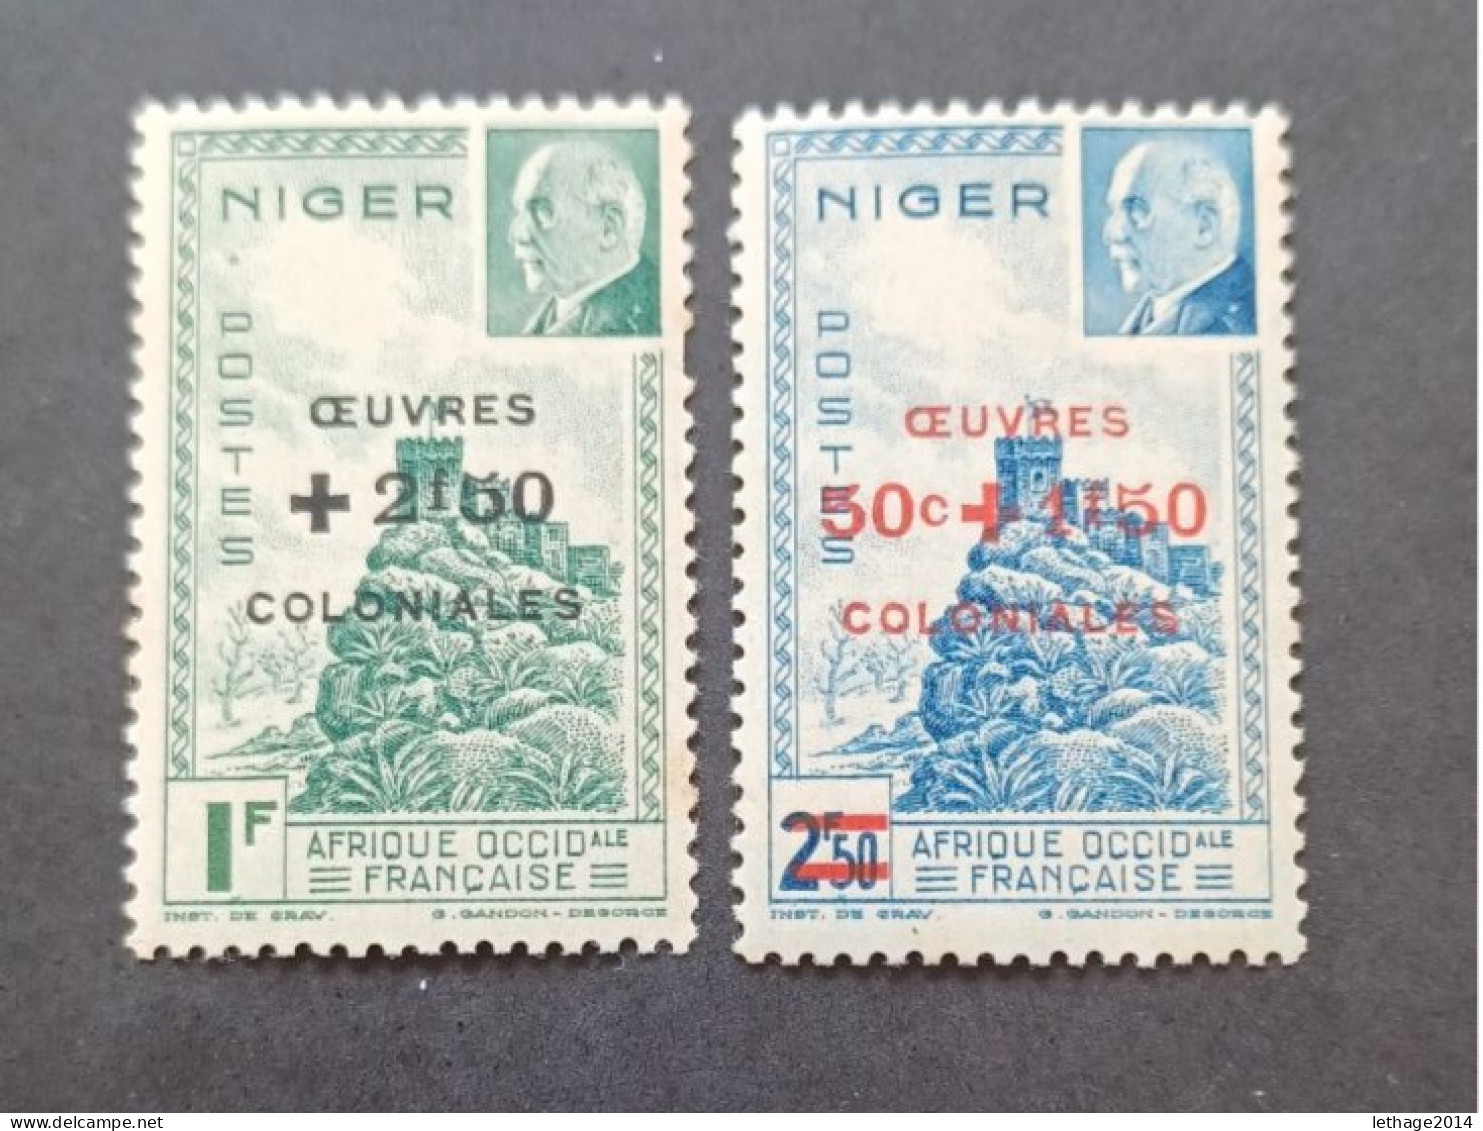 FRANCE COLONIE NIGER 1944 MARECHAL PETAIN SURCHARGES OEUVRES COLONIALES CAT YVERT N. 95/96 MNH - 1944 Maréchal Pétain, Surchargés – Œuvres Coloniales